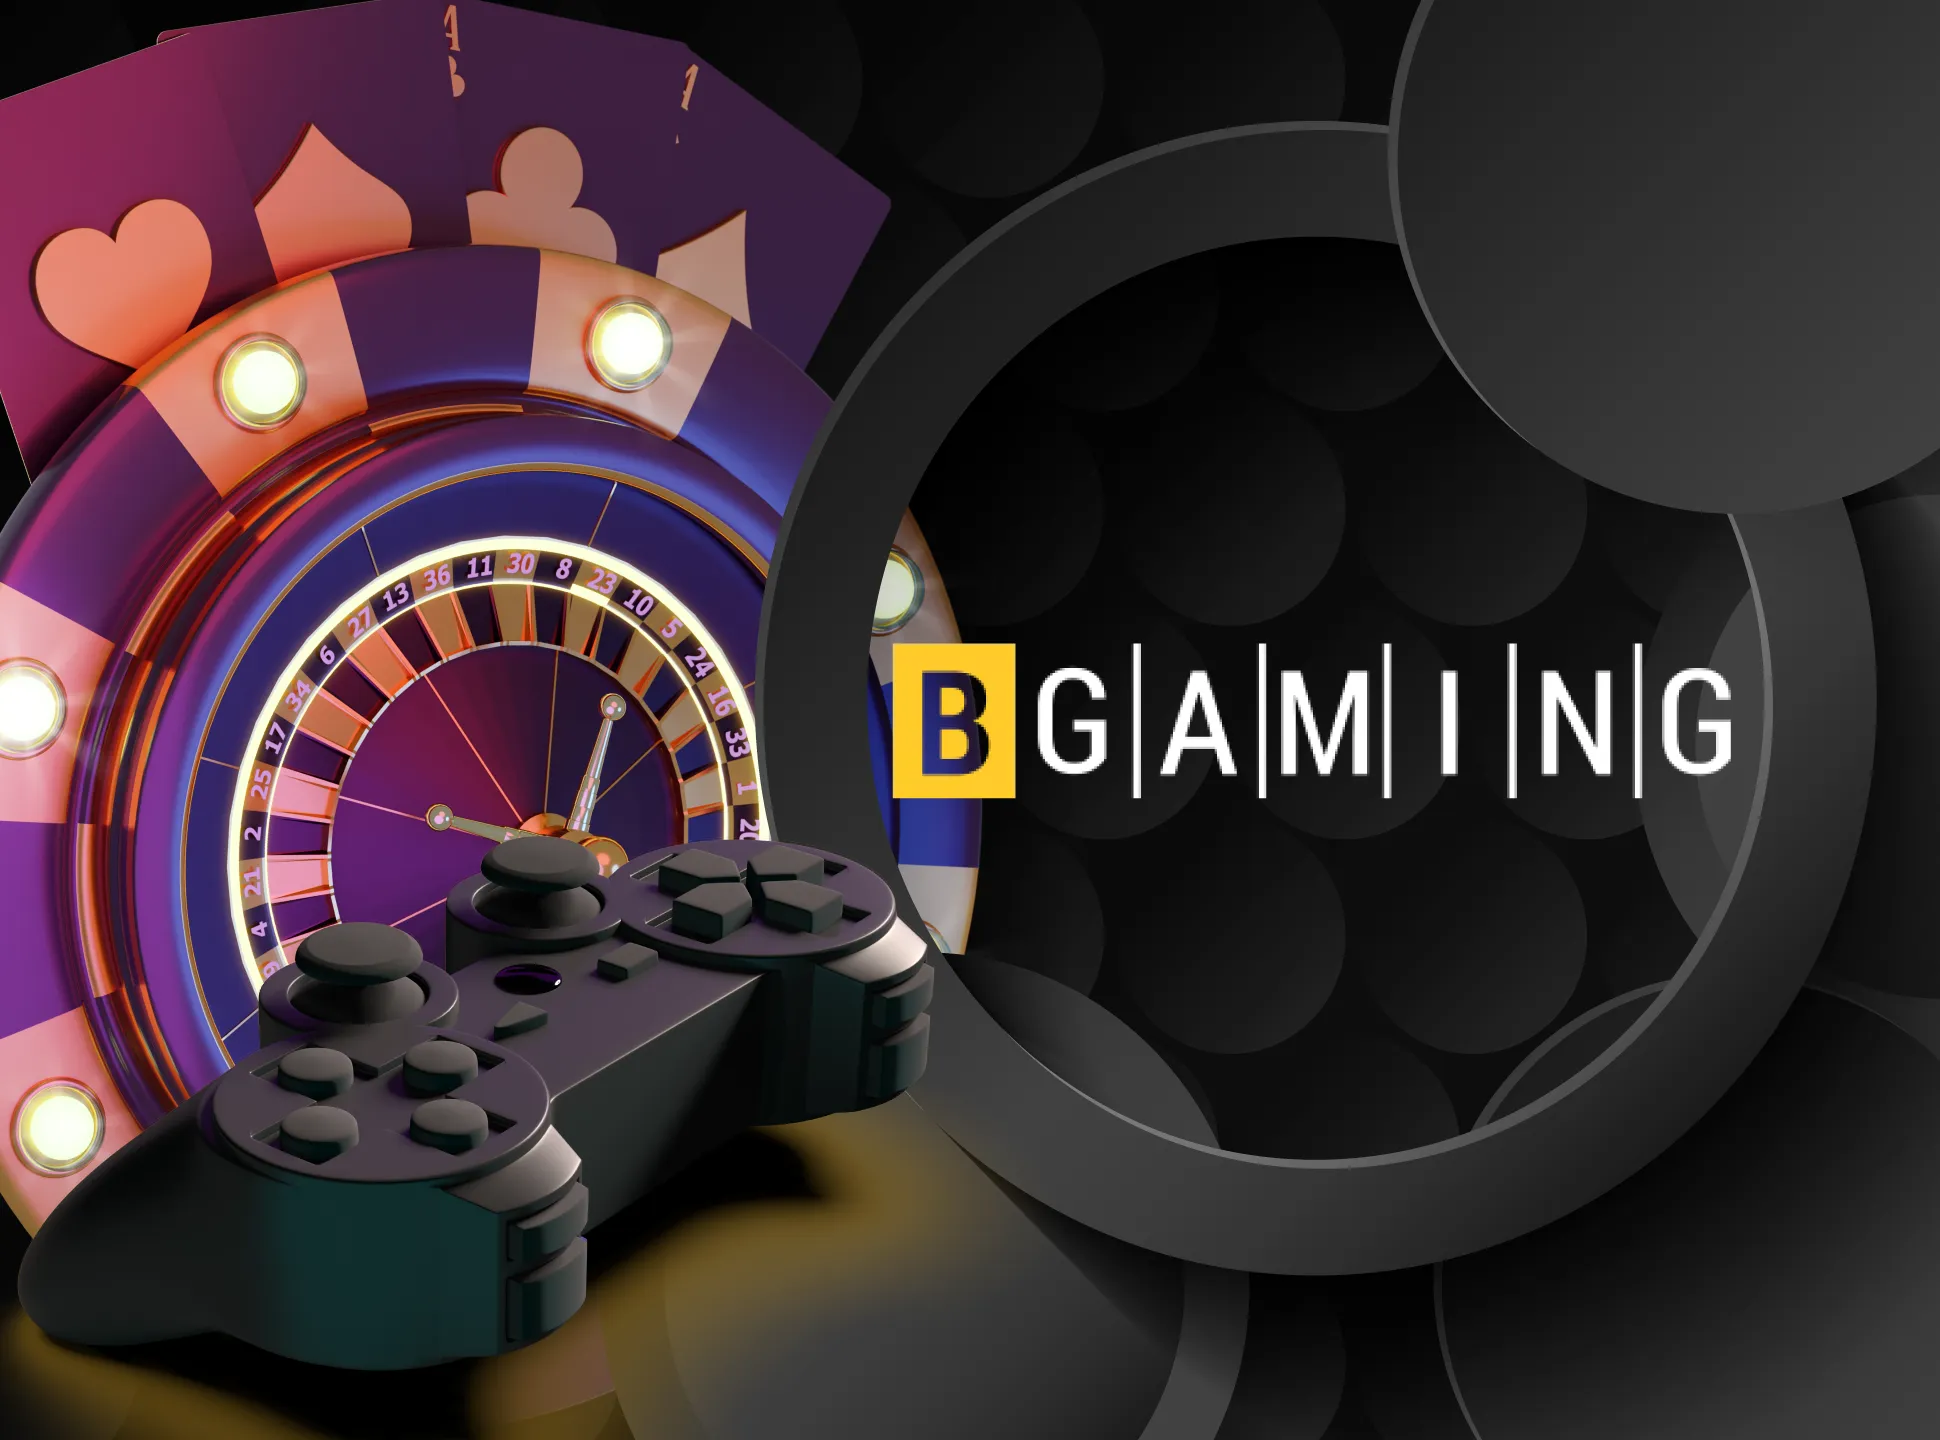 The games of BGaming support cryptocurrency.